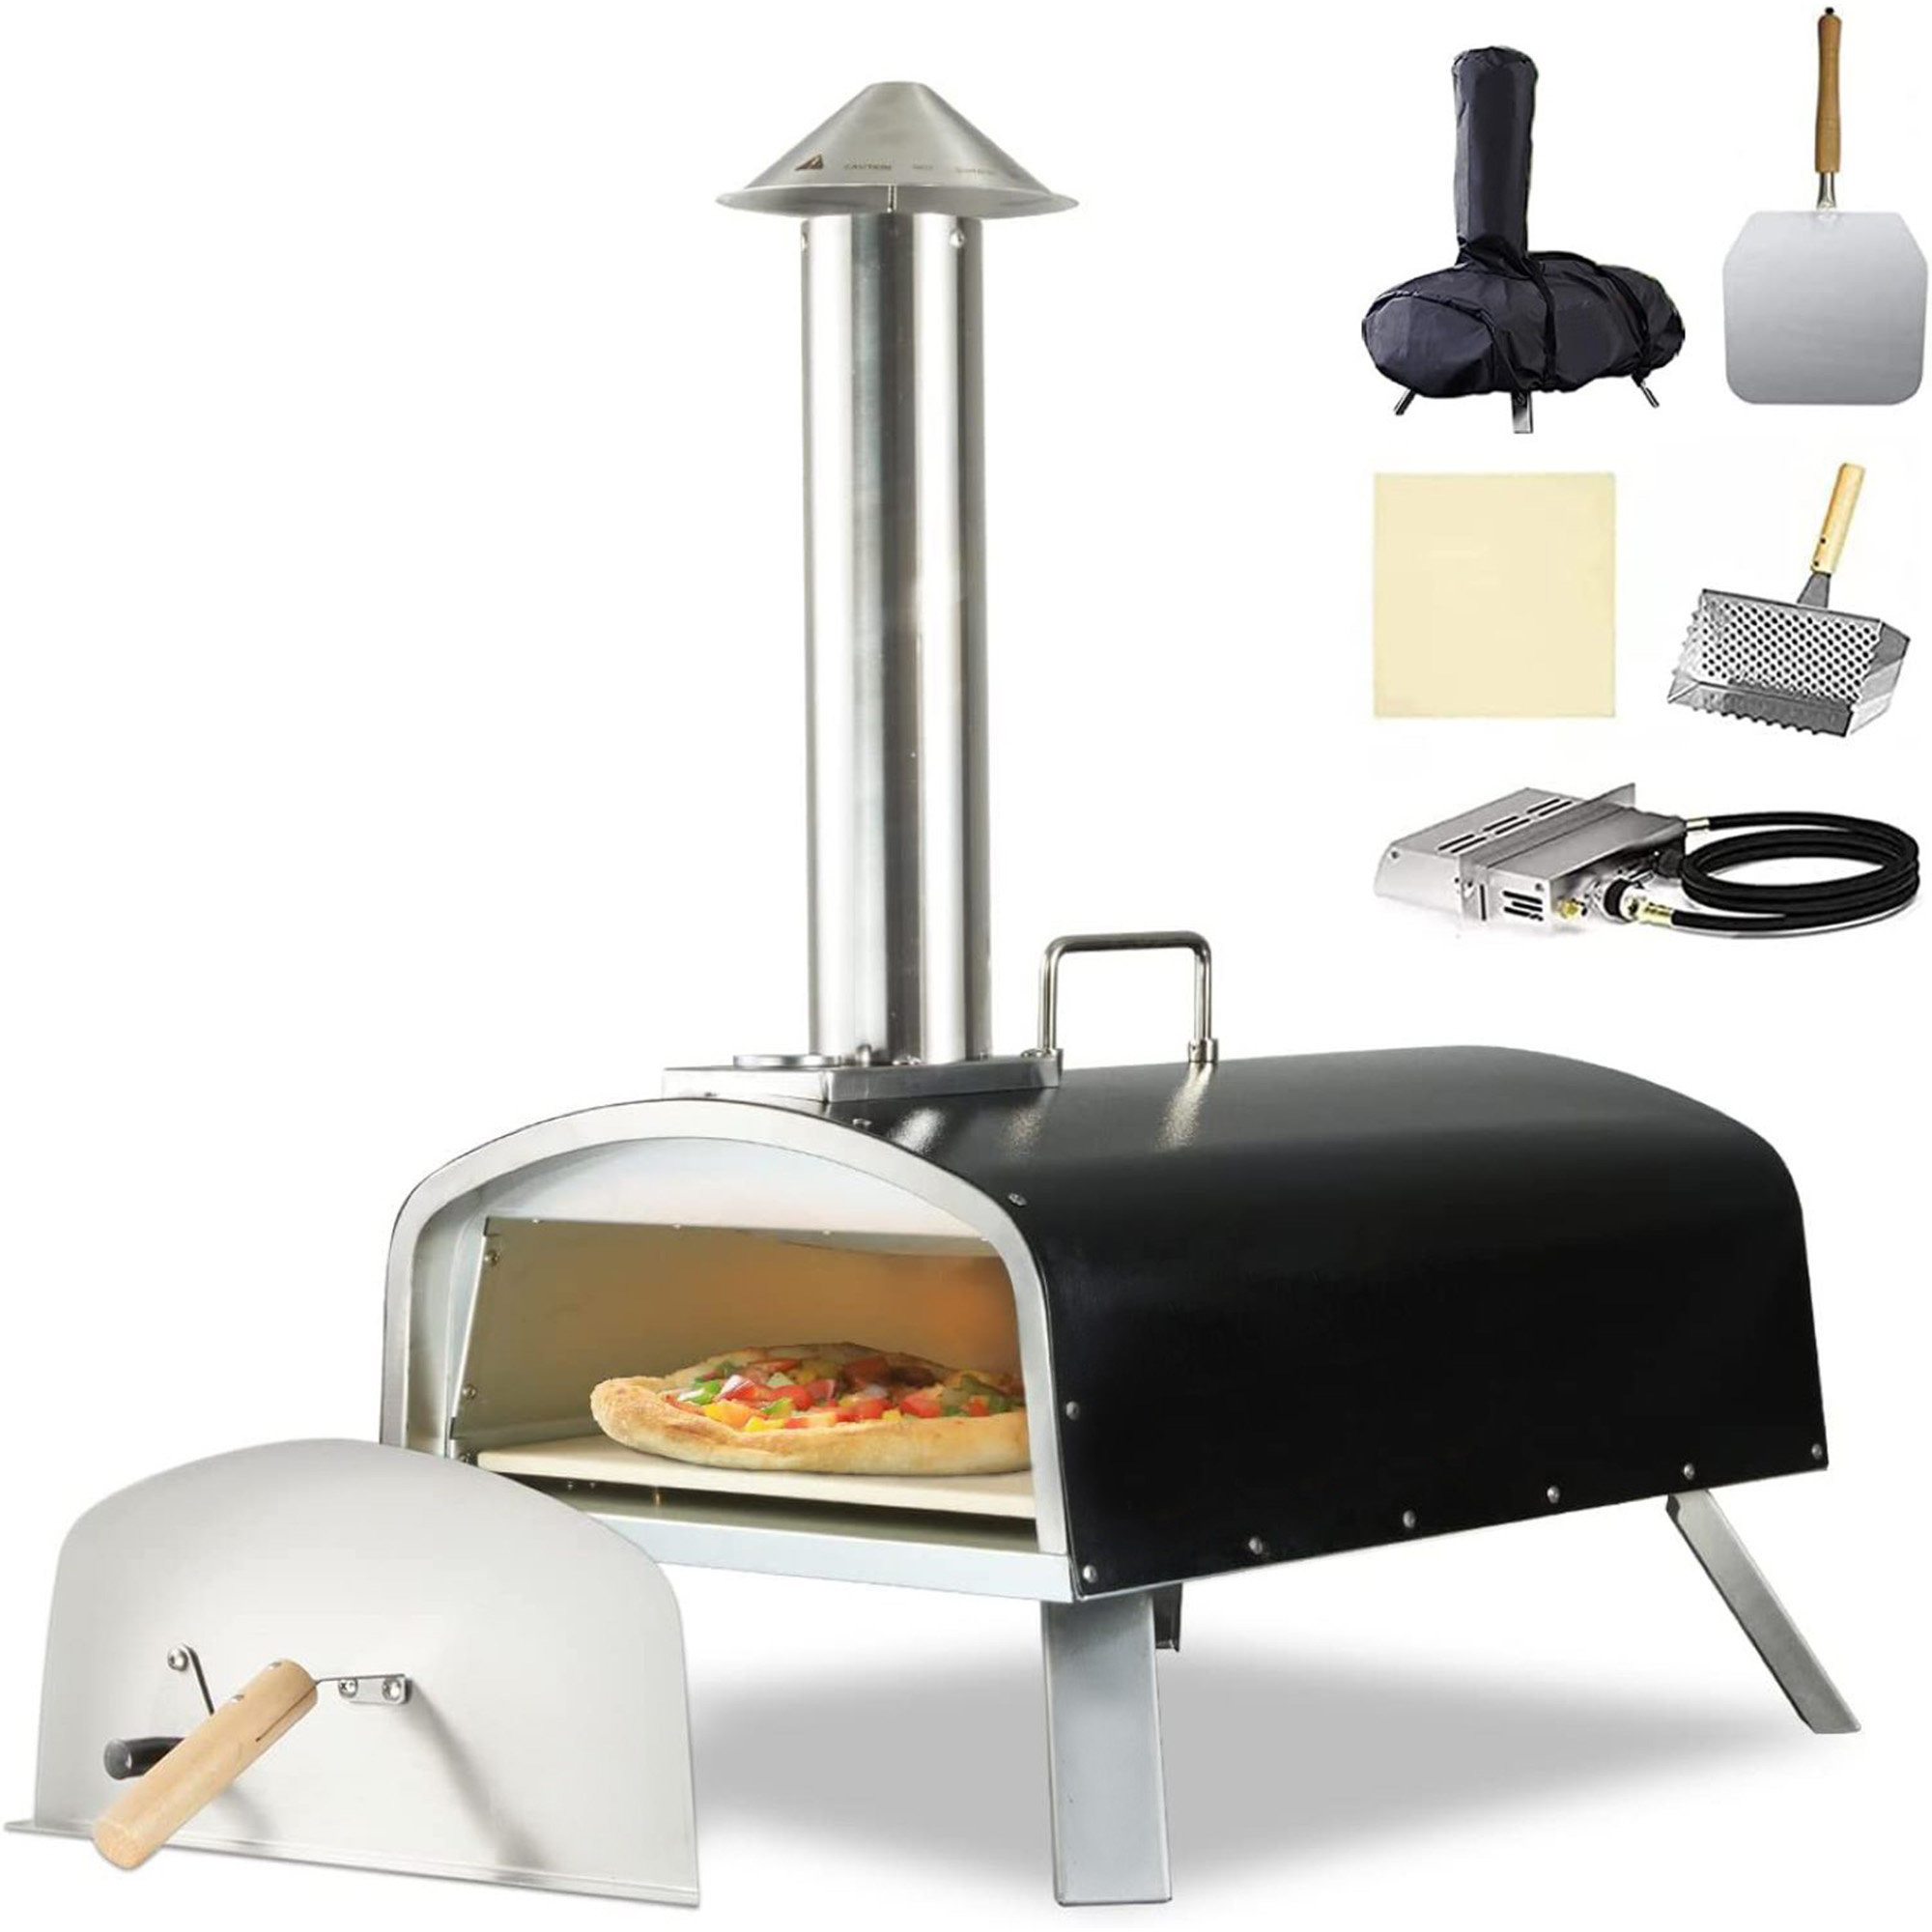 BIG HORN OUTDOORS 16 Inch Wood Pellet Pizza Oven Review 